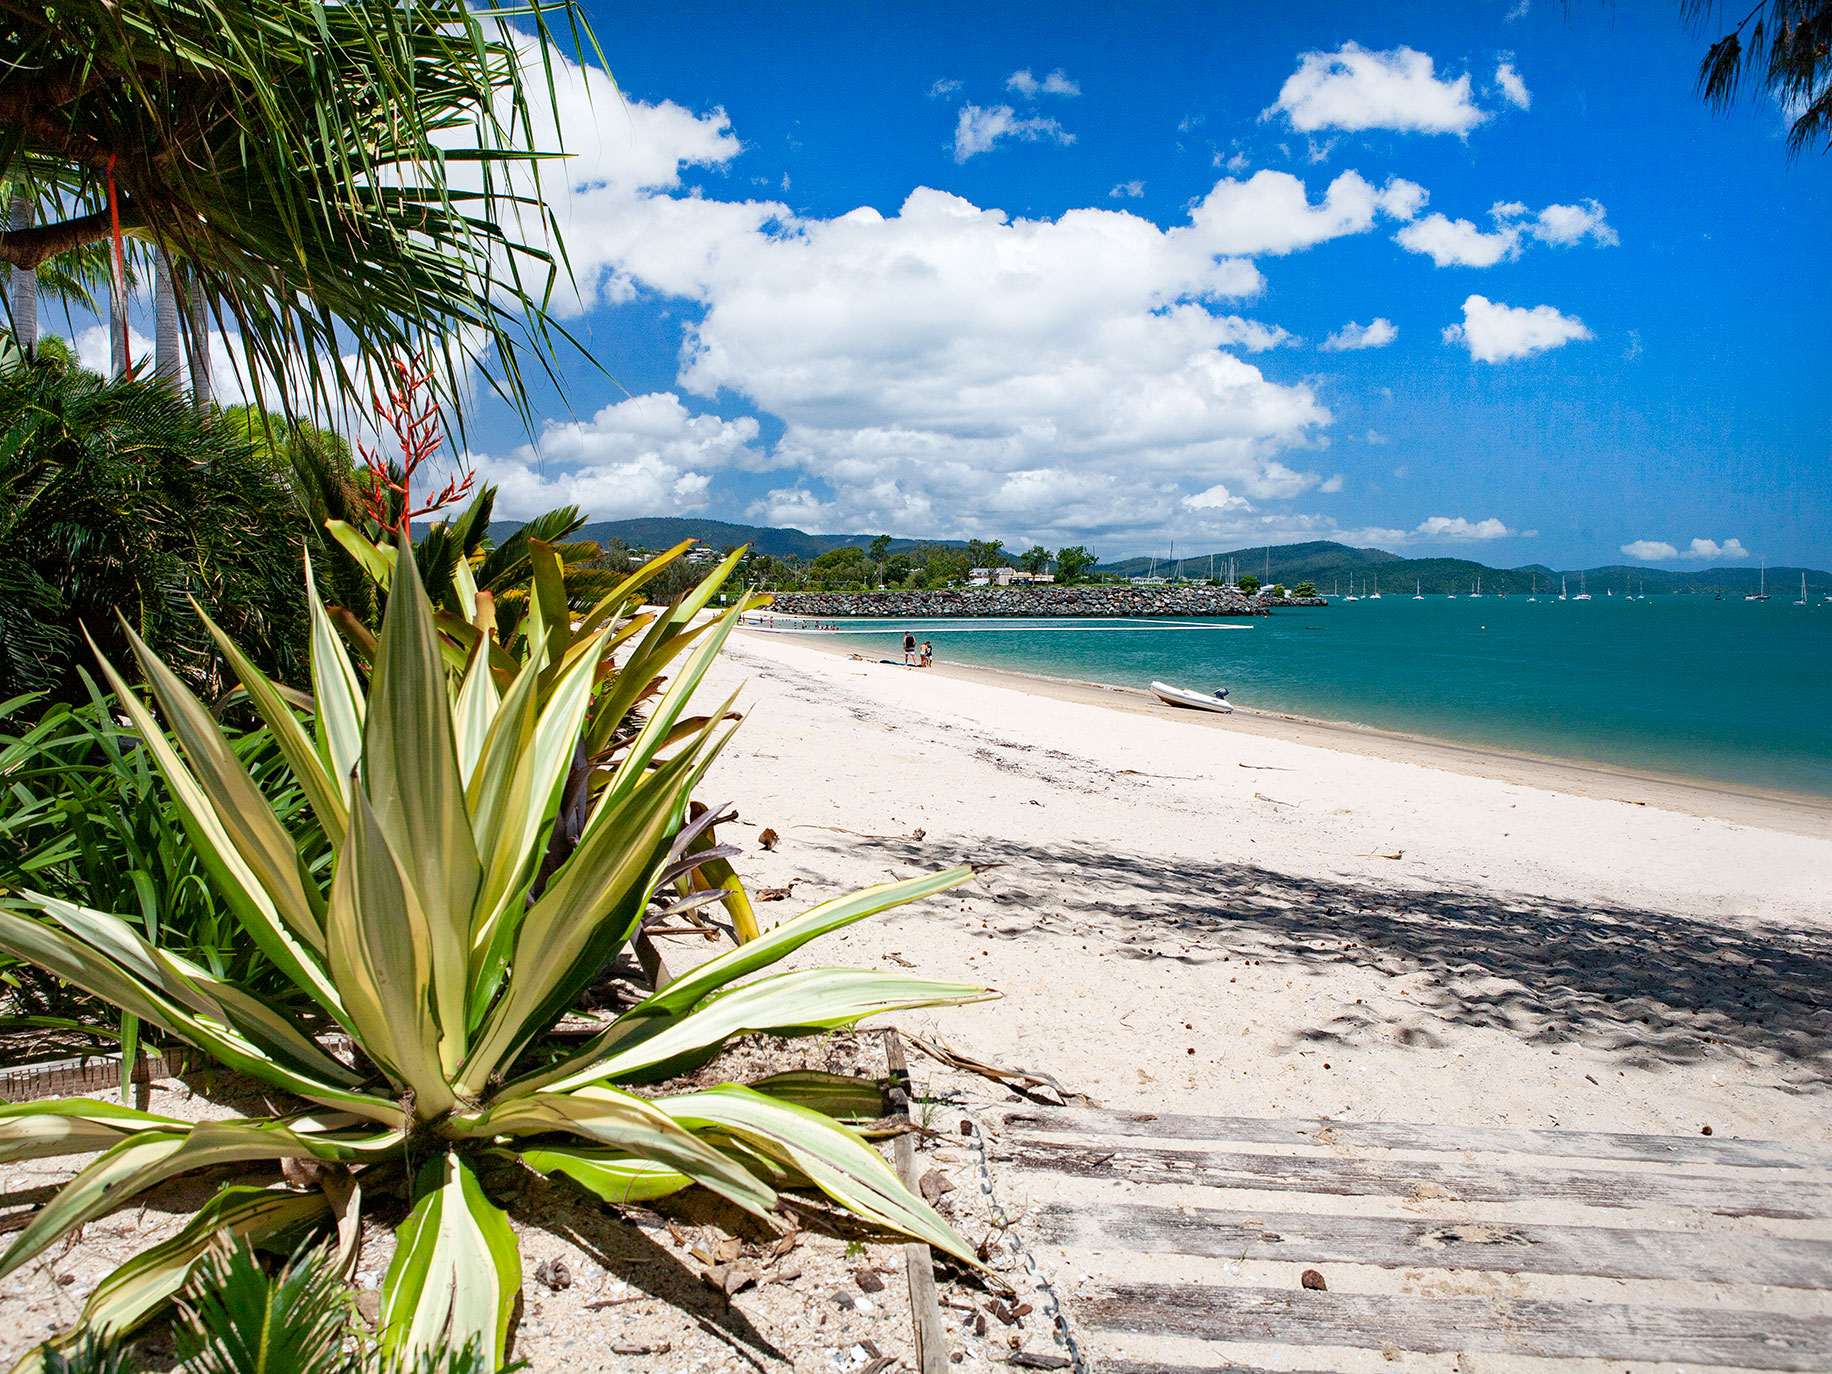 Airlie Beach, Queensland retains sections of untouched 'lost in paradise-like' beachfront